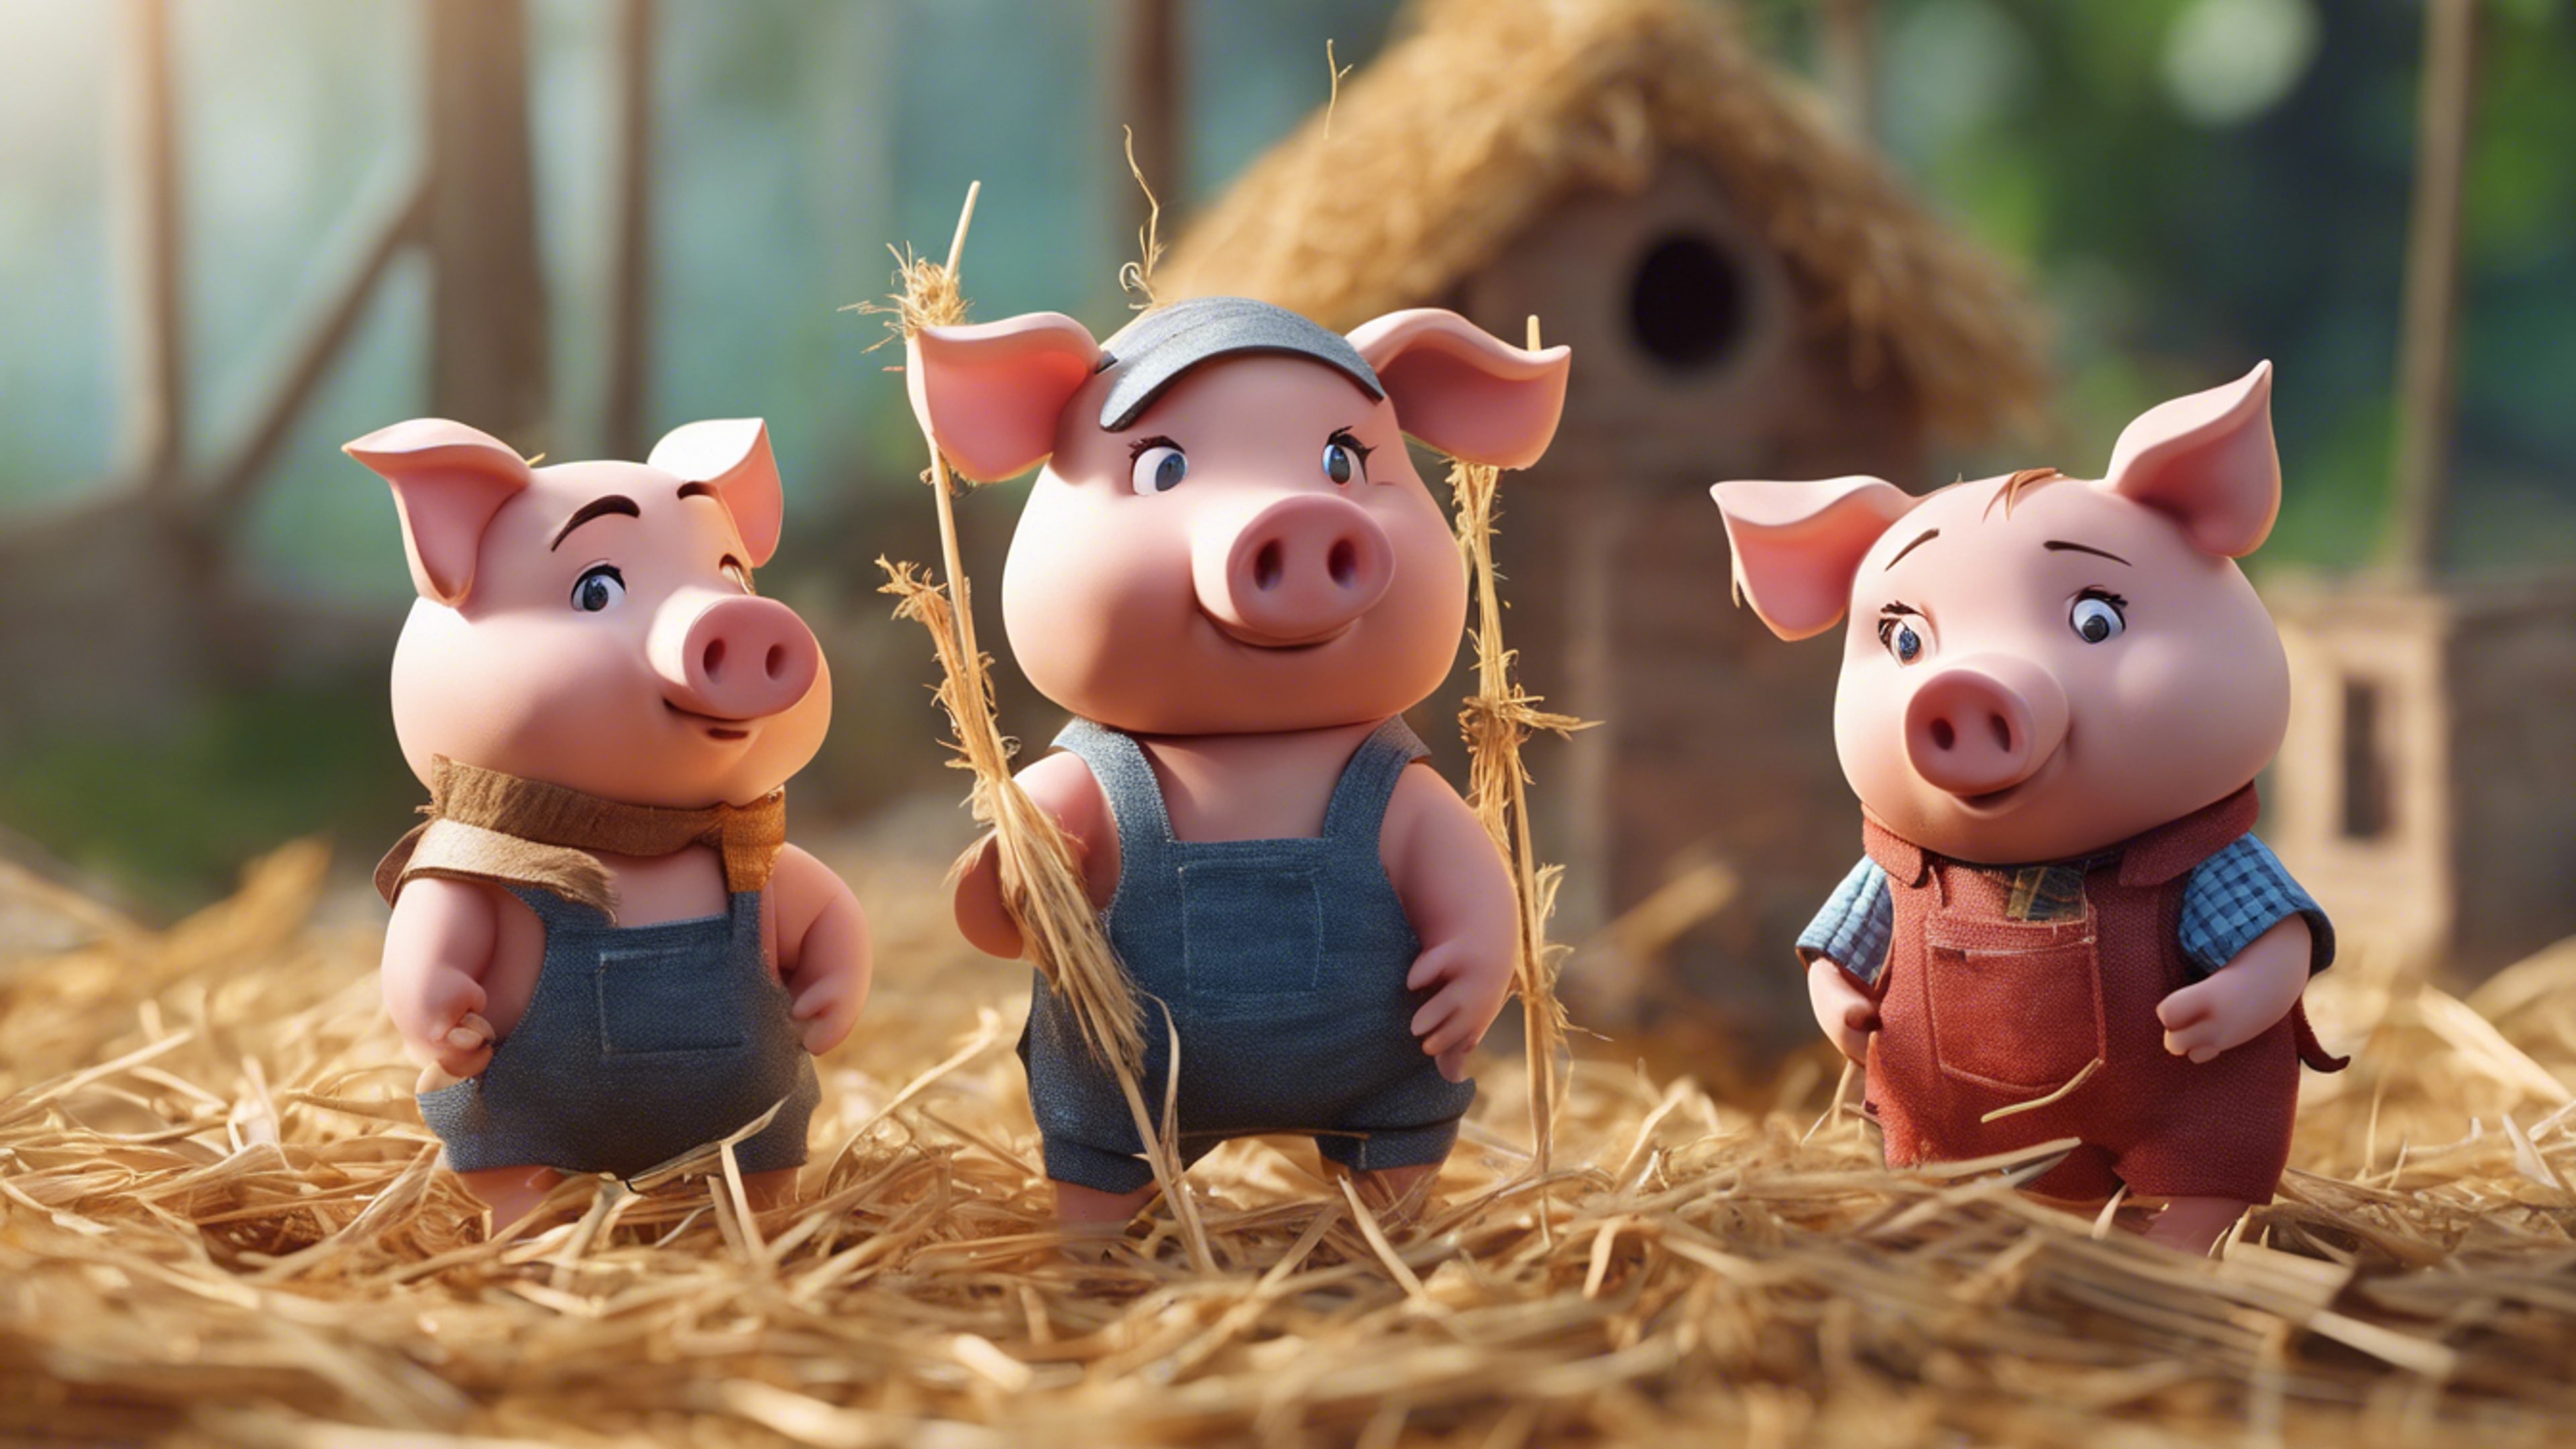 A fun children's illustration of three little pigs building with straw, wood, and bricks respectively. Fondo de pantalla[b9cb10ffb666475186ab]